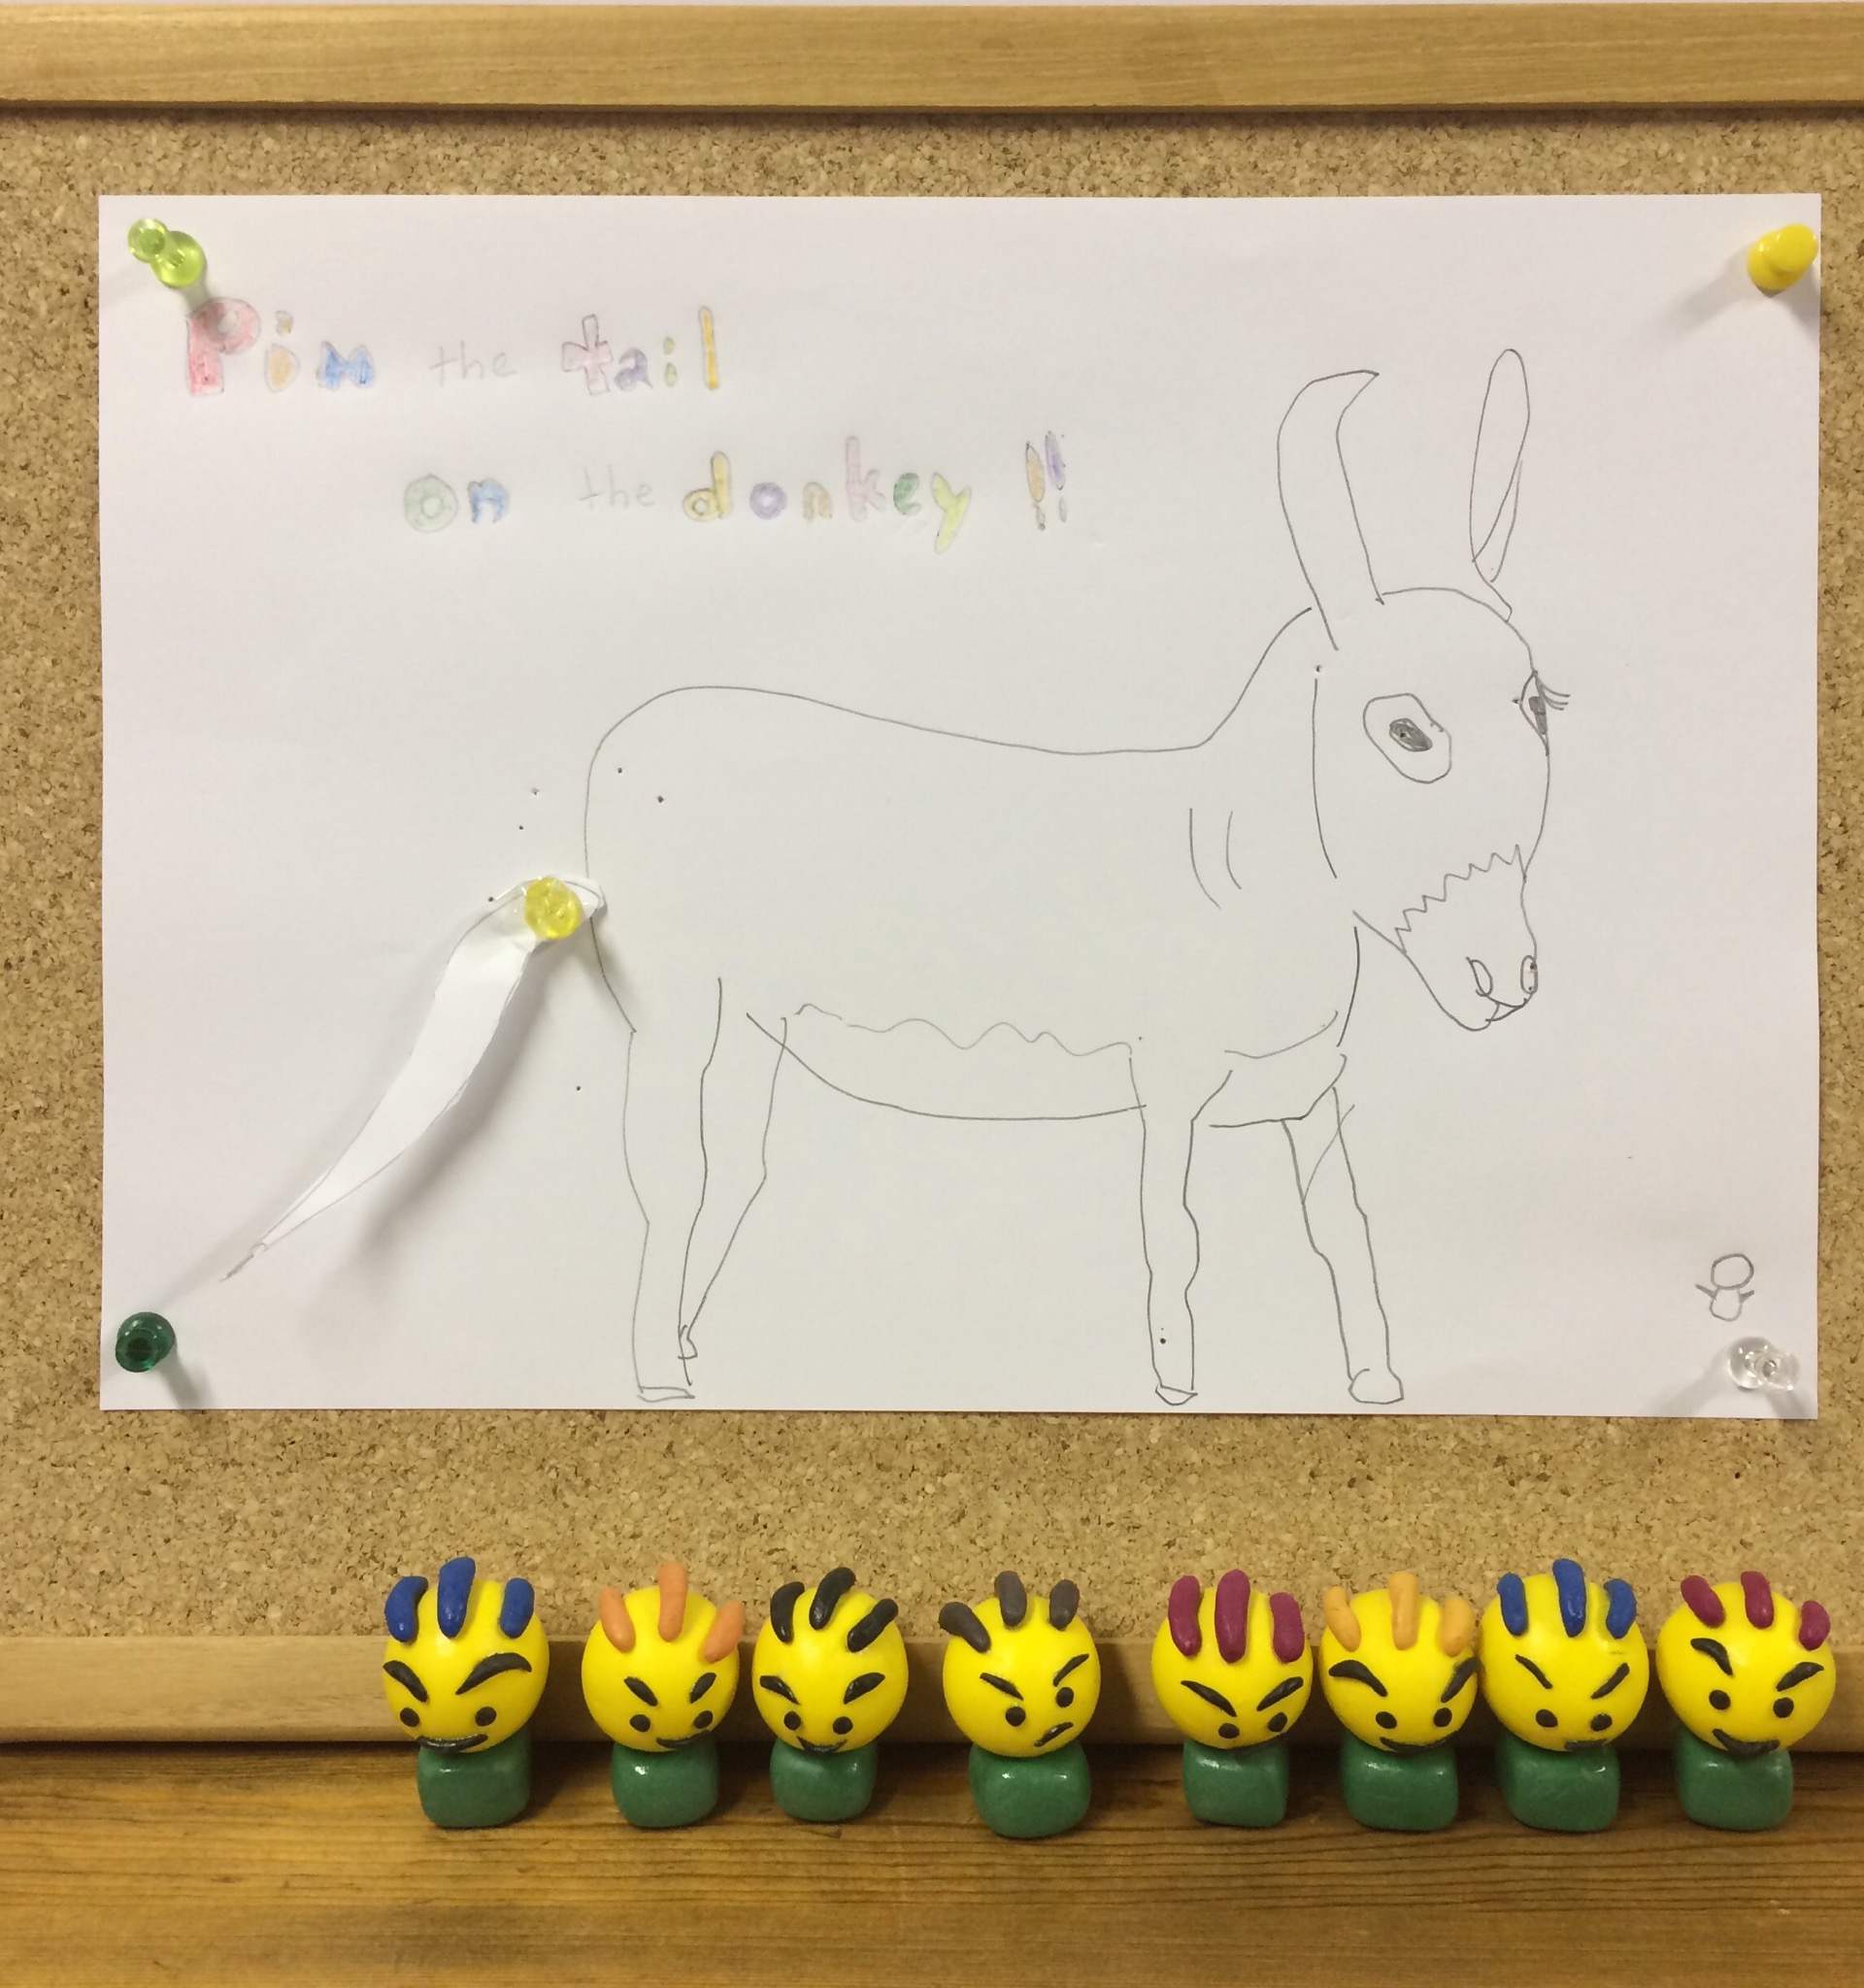 Pin the tail on the donkey!